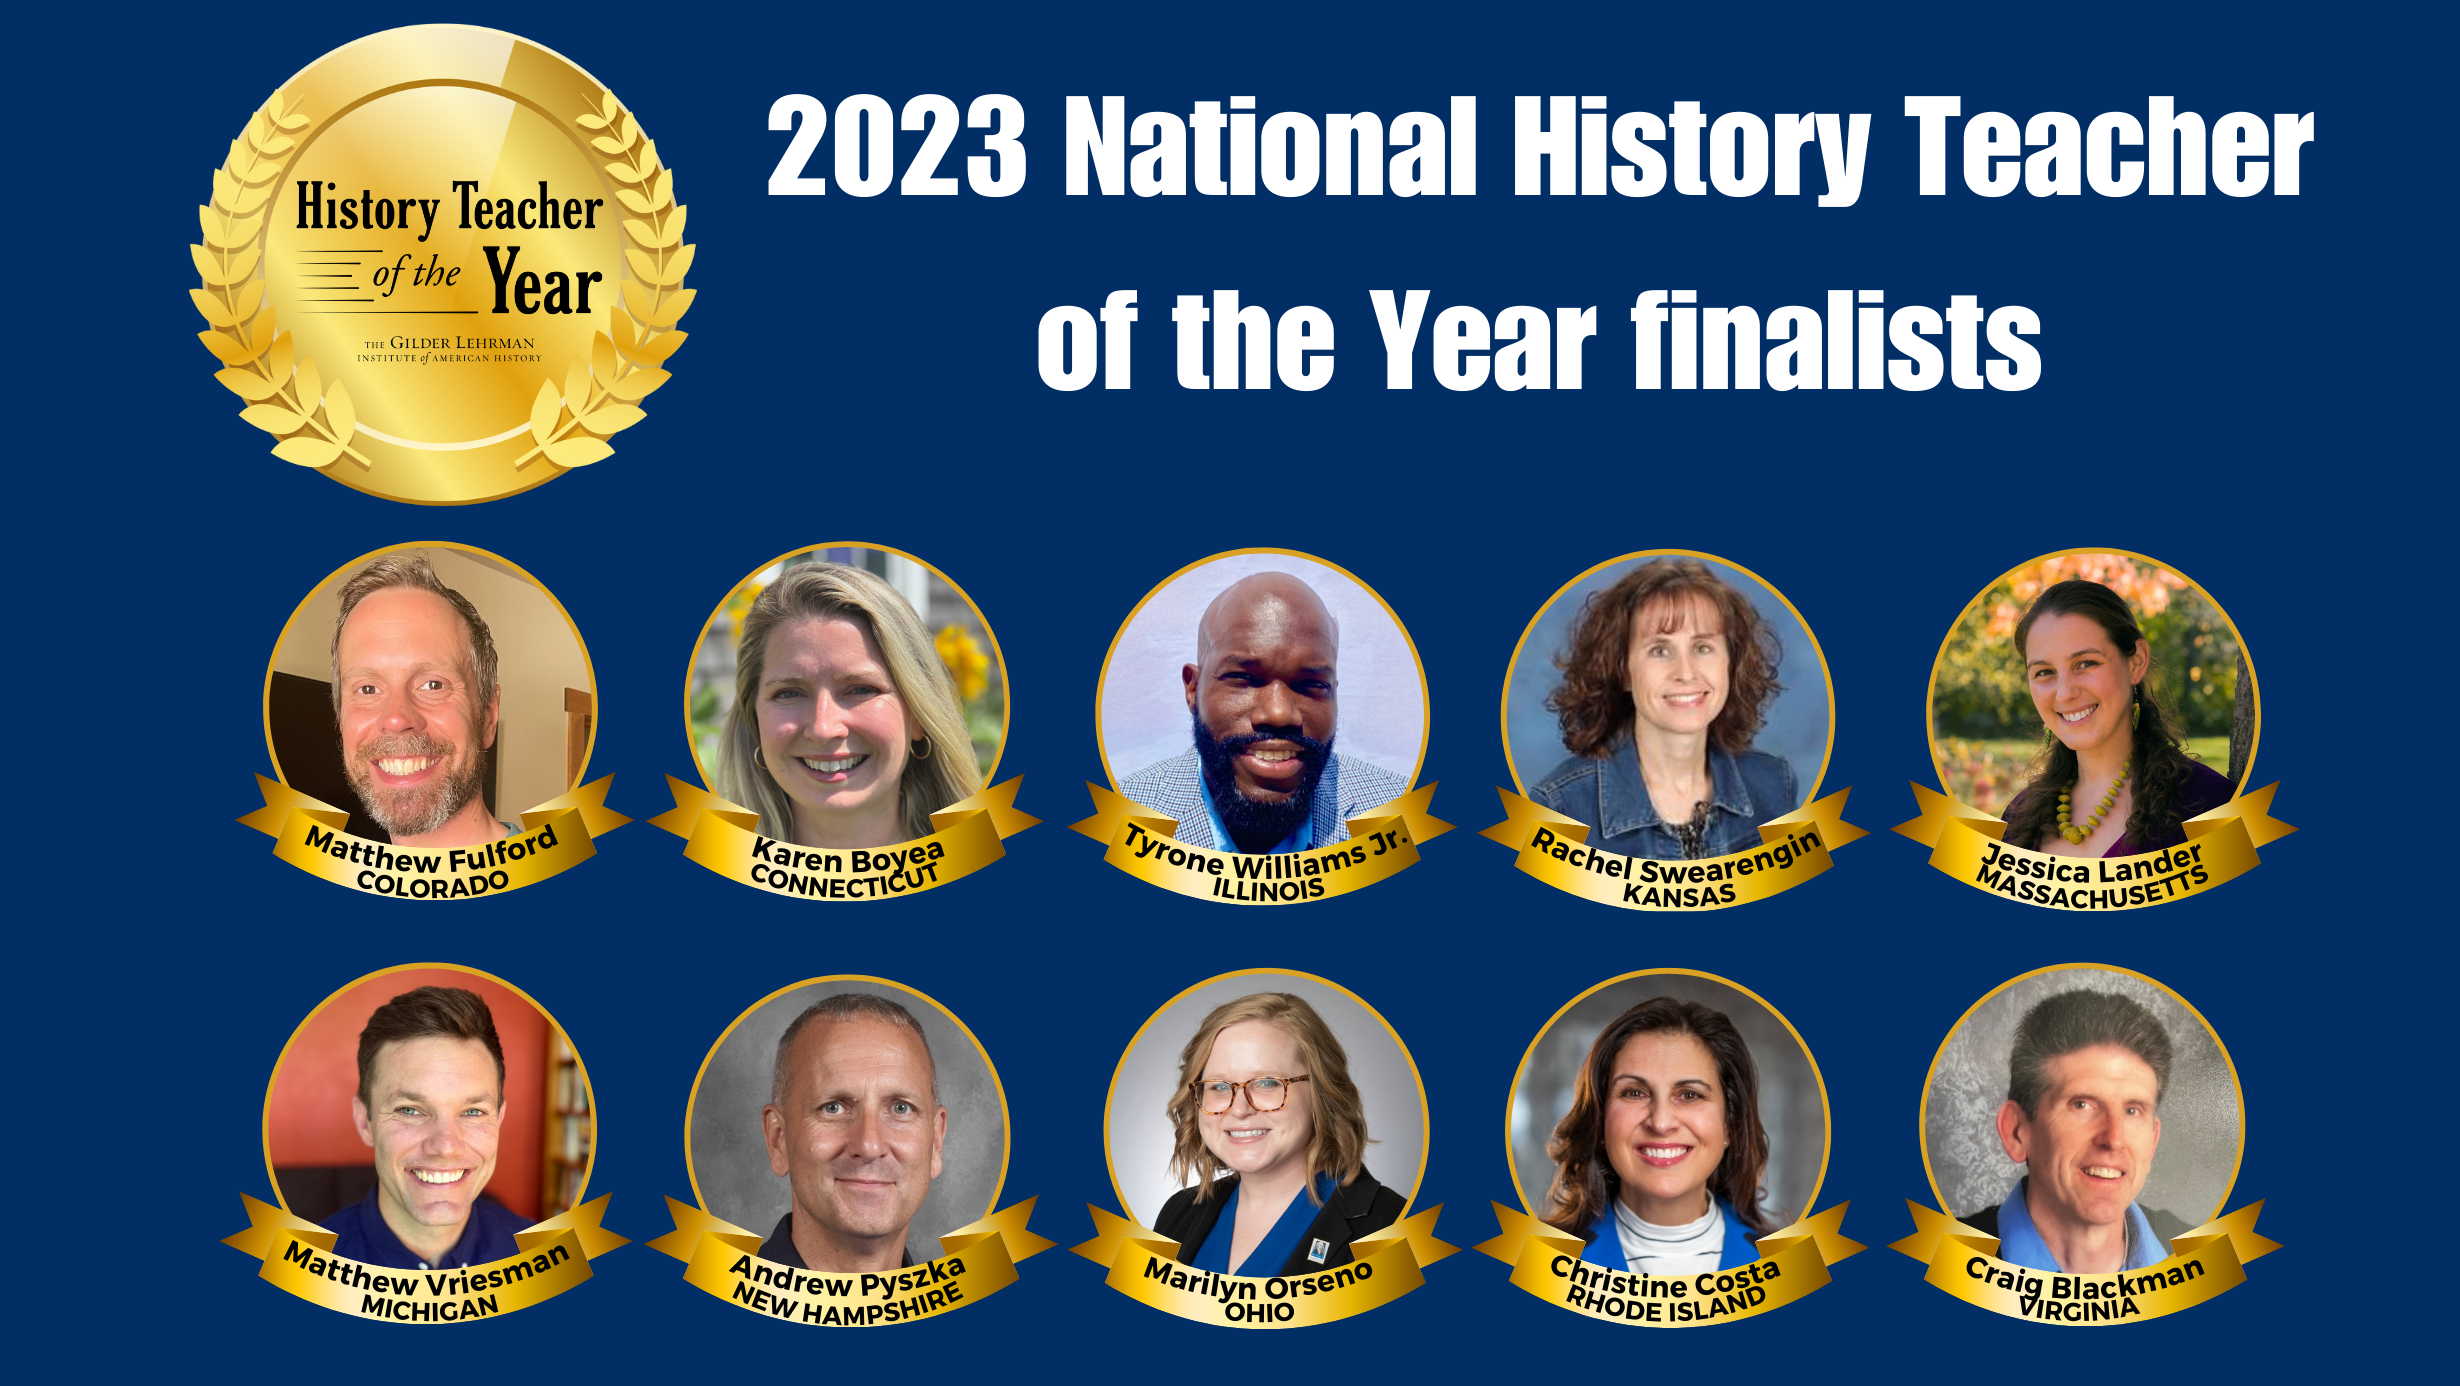 2023 National History Teacher of the Year finalists